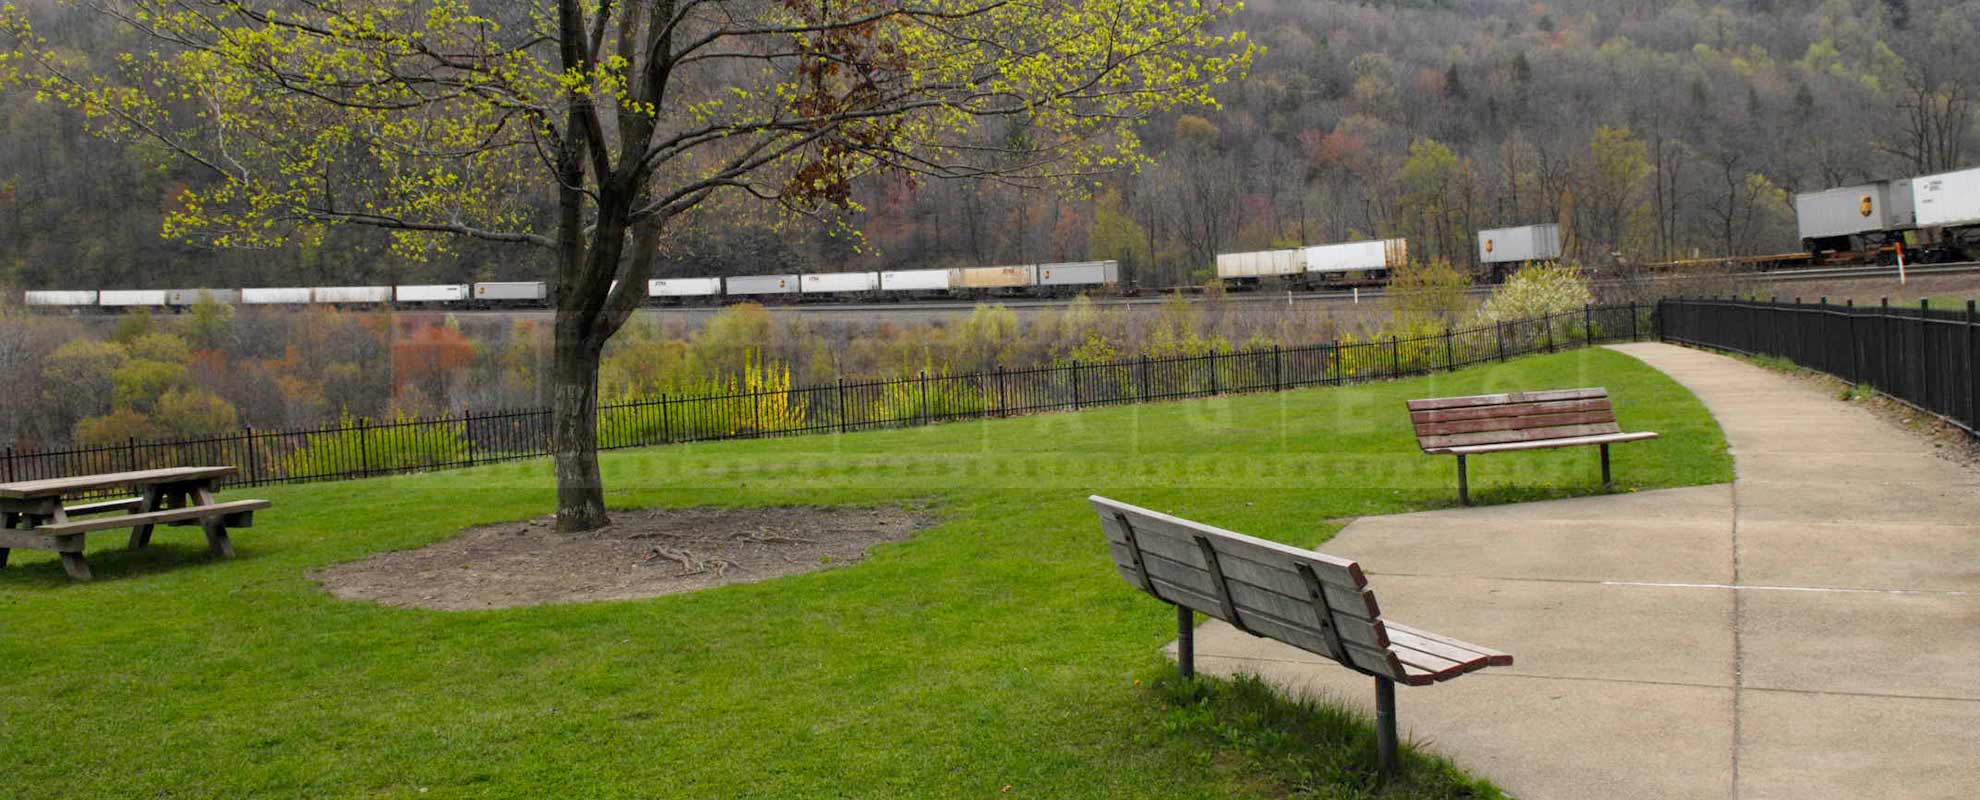 beautiful park with benches to observe trains